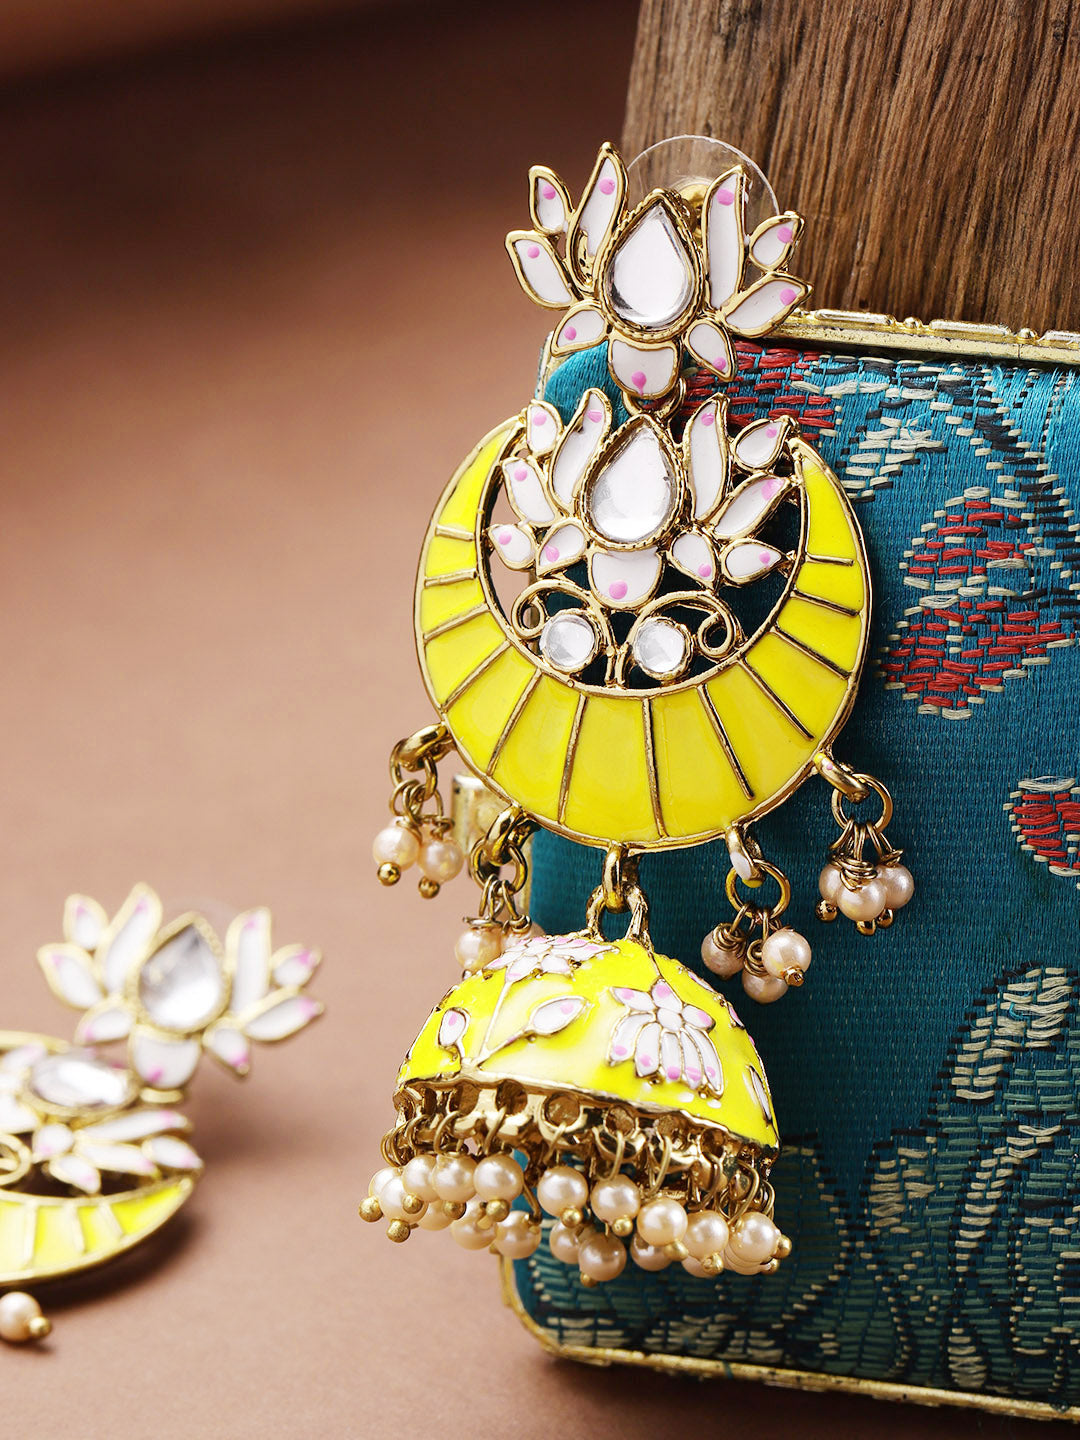 Handpainted Gold Plated Yellow lotus Inspired Jhumka Earring For Women And Girls